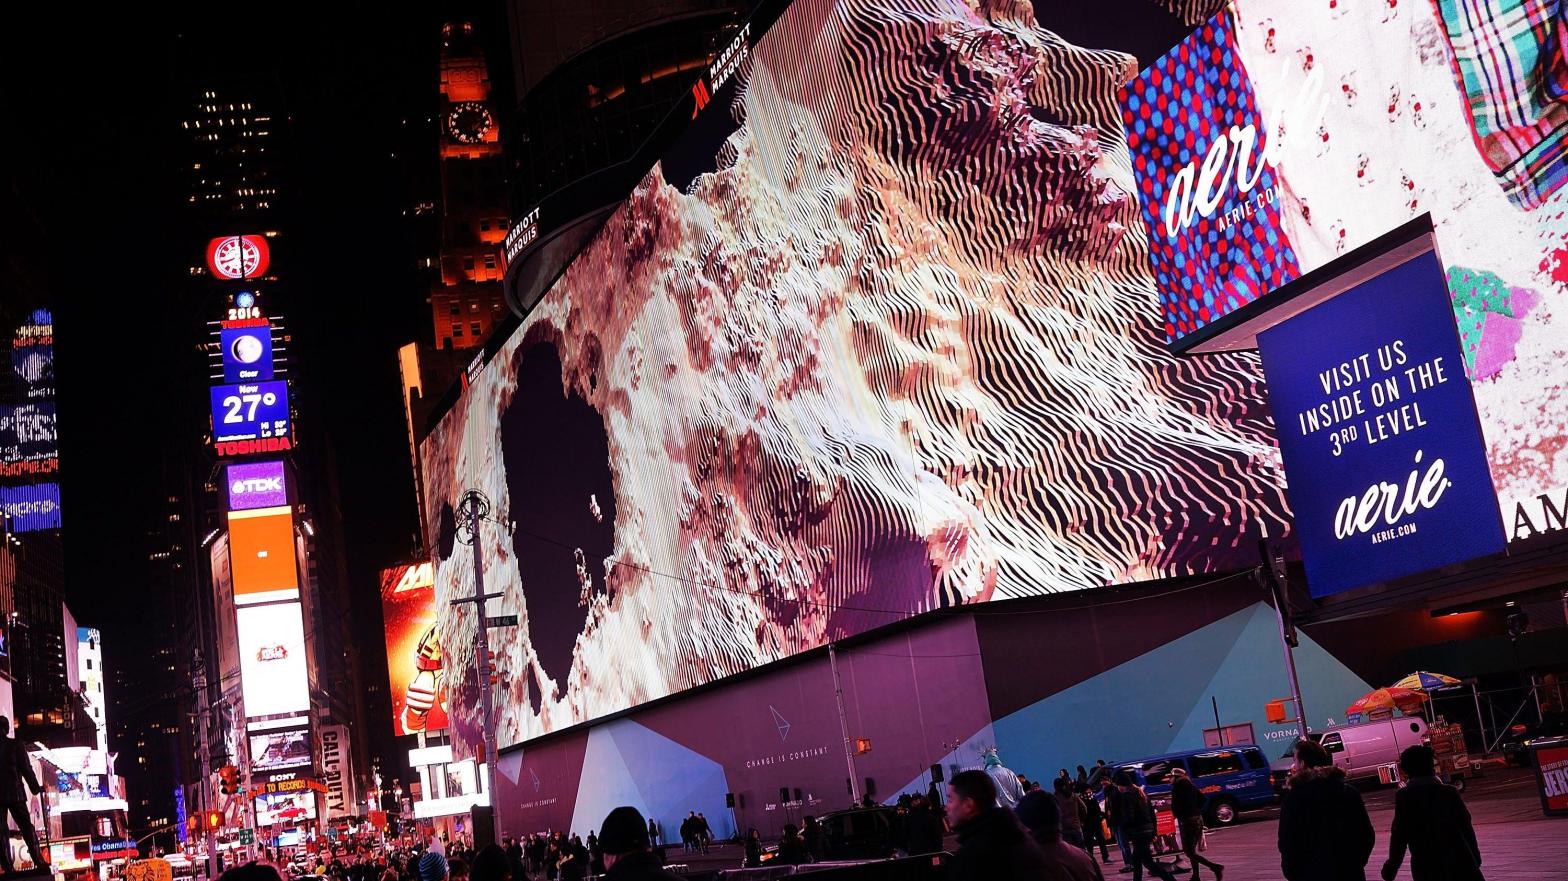 Billed as Times Square's largest and most expensive digital billboard, a new megascreen is debuted in front of the Marriott Marquis hotel on November 18, 2014 in New York City. (Photo: Spencer Platt, Getty Images)